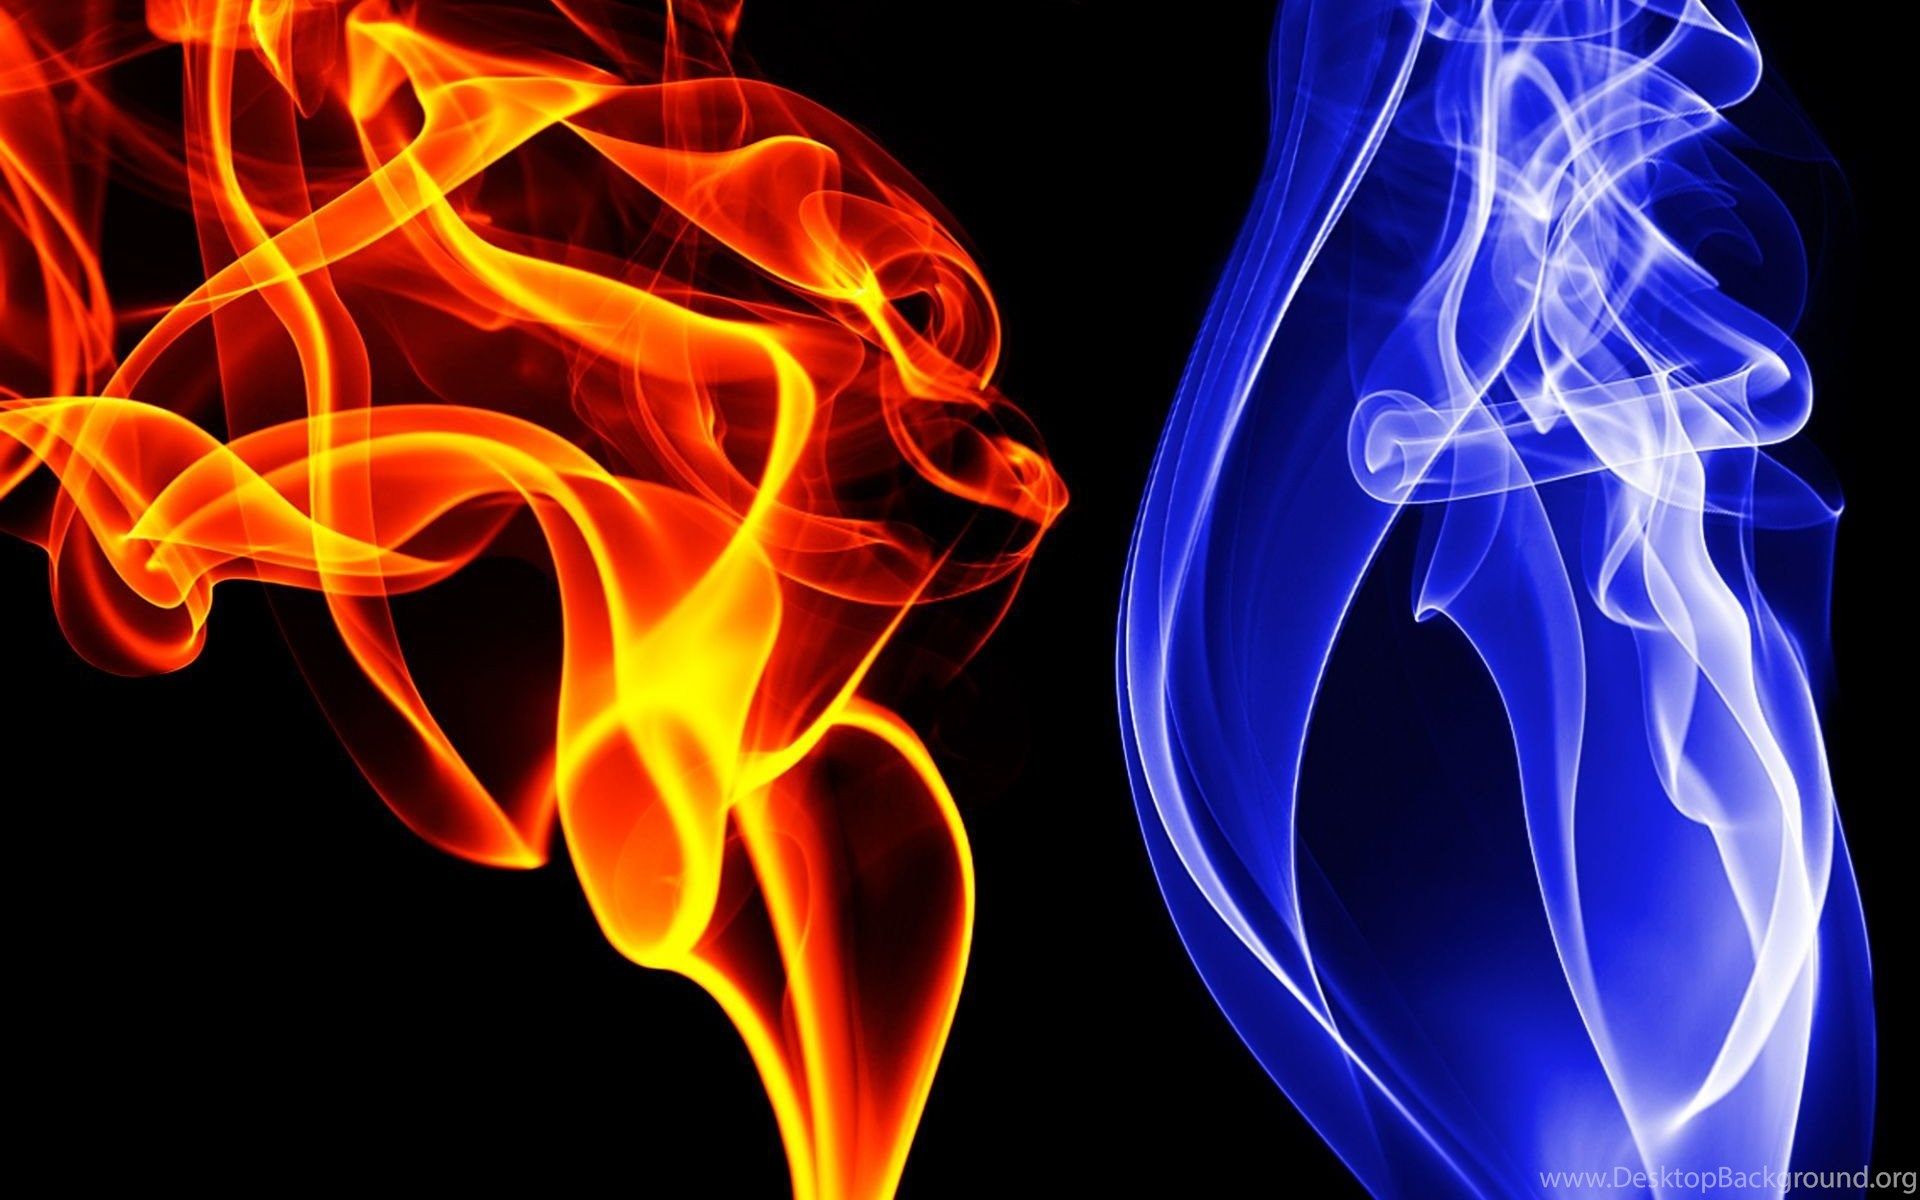 Wallpaper Black, Fire, Ice, Fire And Ice. Desktop Background